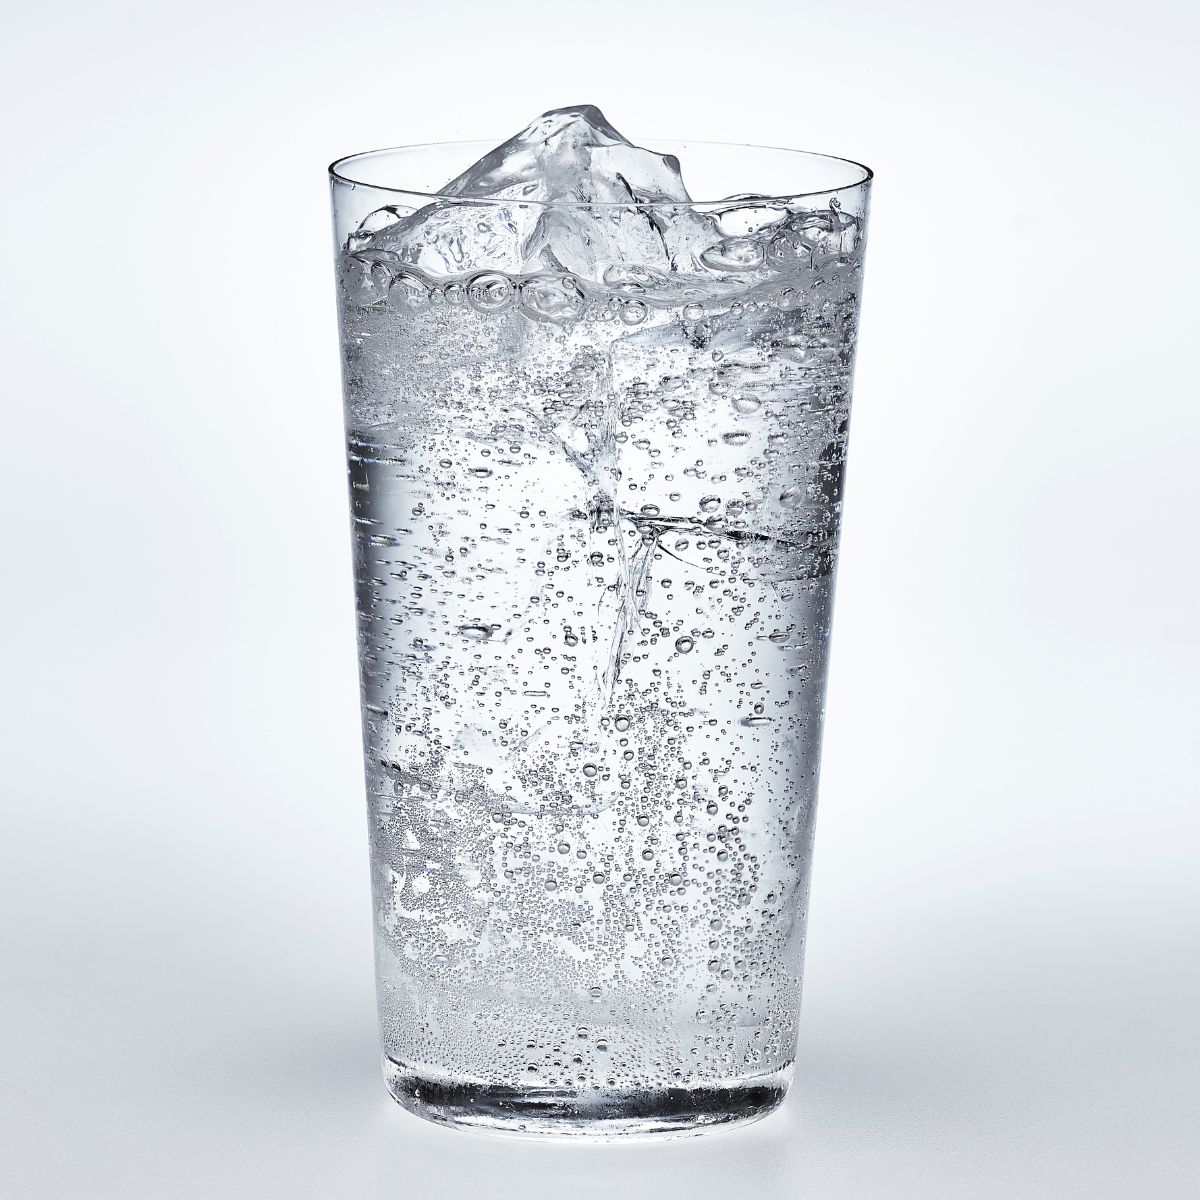 <p>Carbonated water is an excellent vegan egg alternative thanks to its neutral taste, and can be used in lighter recipes such as pancakes, cakes, cupcakes, and breads. For each egg, you’ll need 1/4 cup of carbonated water. This substitute is ideal for those looking to cut down on cholesterol and calories in their baked goods.</p>